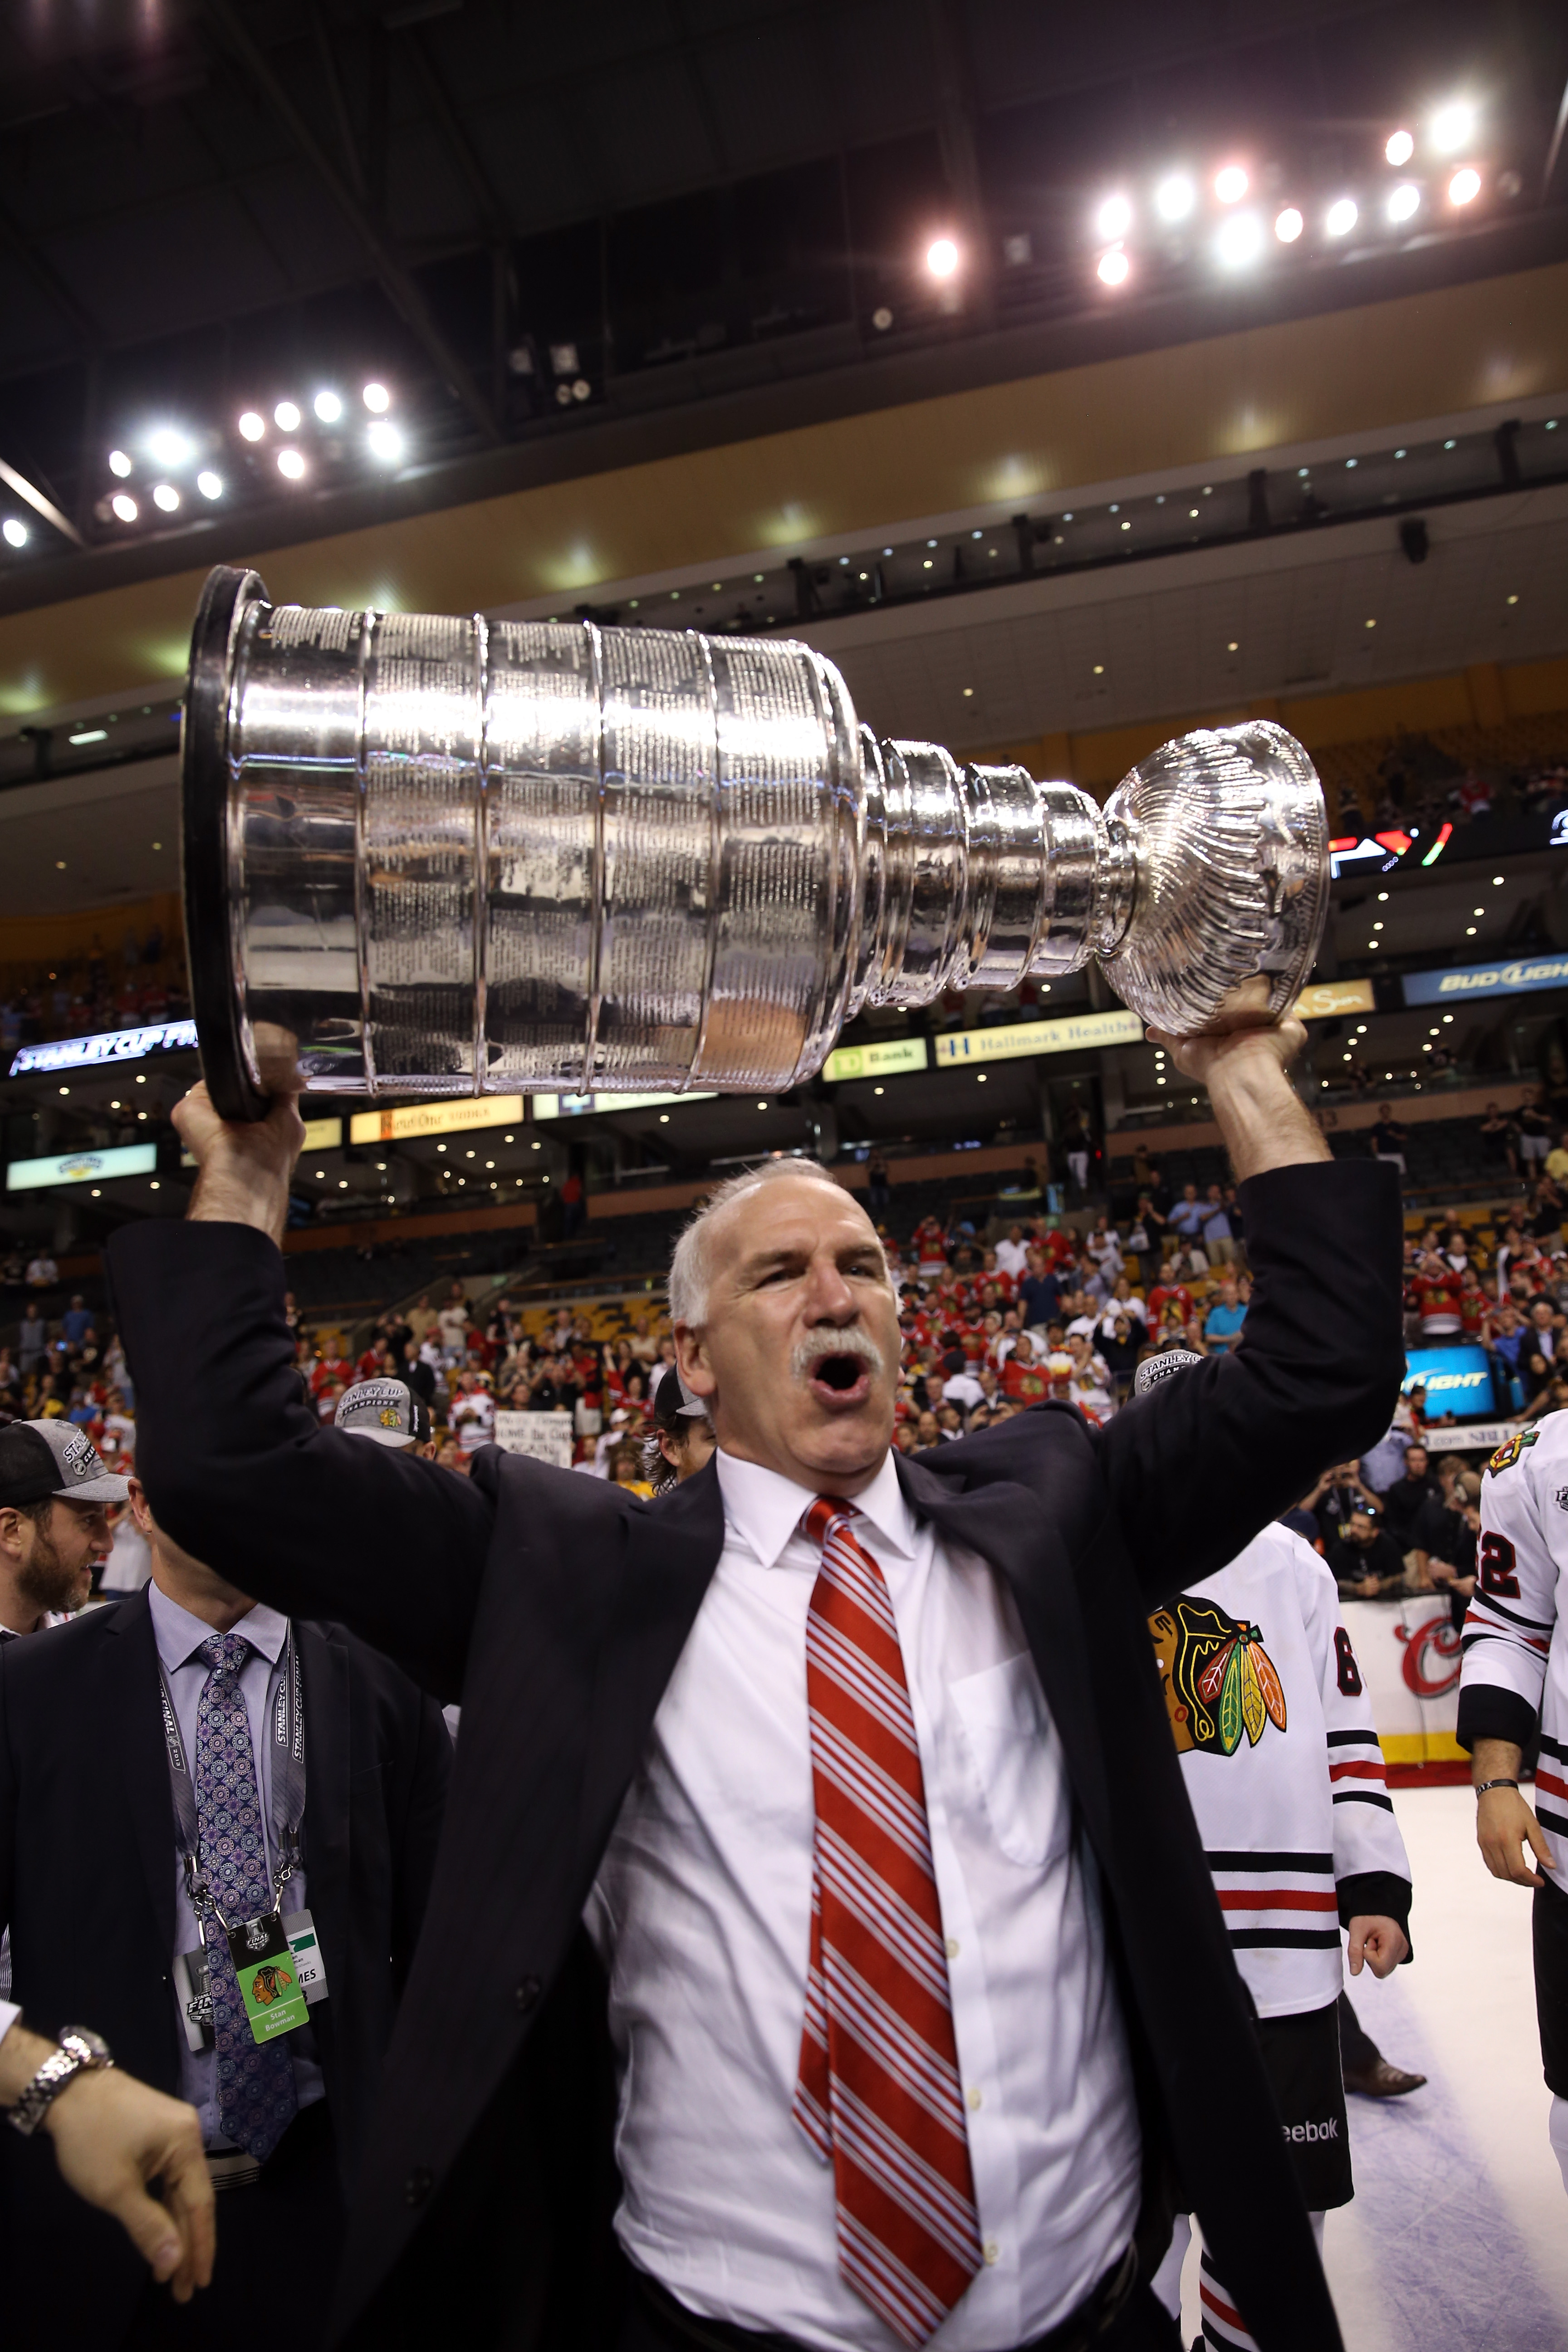 PHOTOS: Joel Quenneville takes Stanley Cup to Children's Hospital